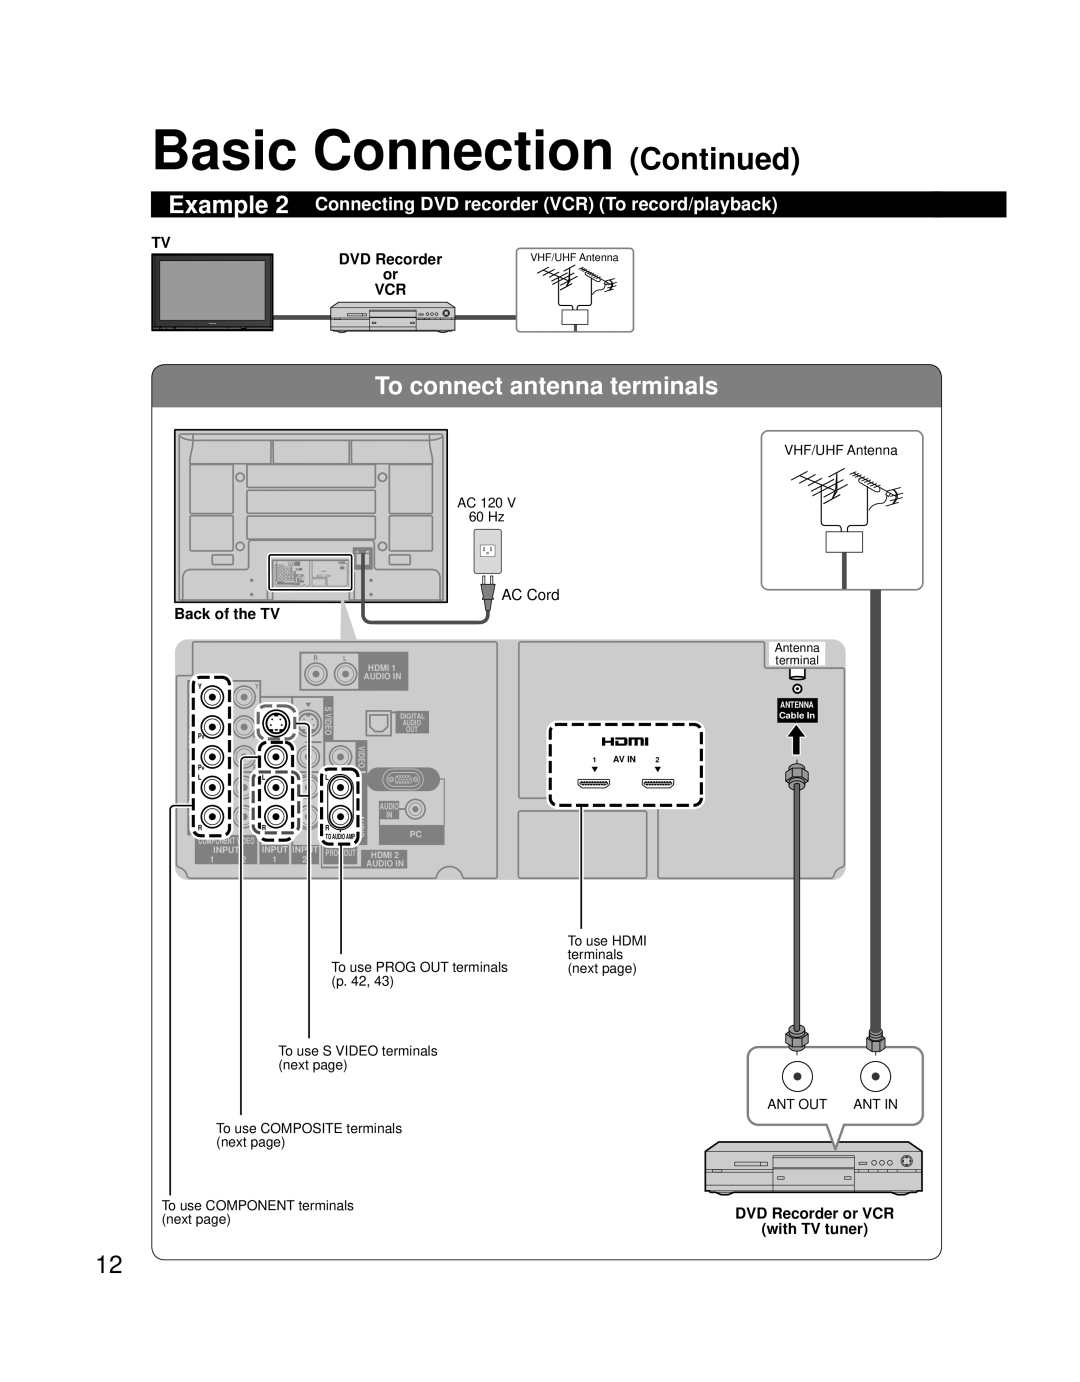 Panasonic TH 58PZ700U Basic Connection Continued, Example 2 Connecting DVD recorder VCR To record/playback, AC Cord, Av In 